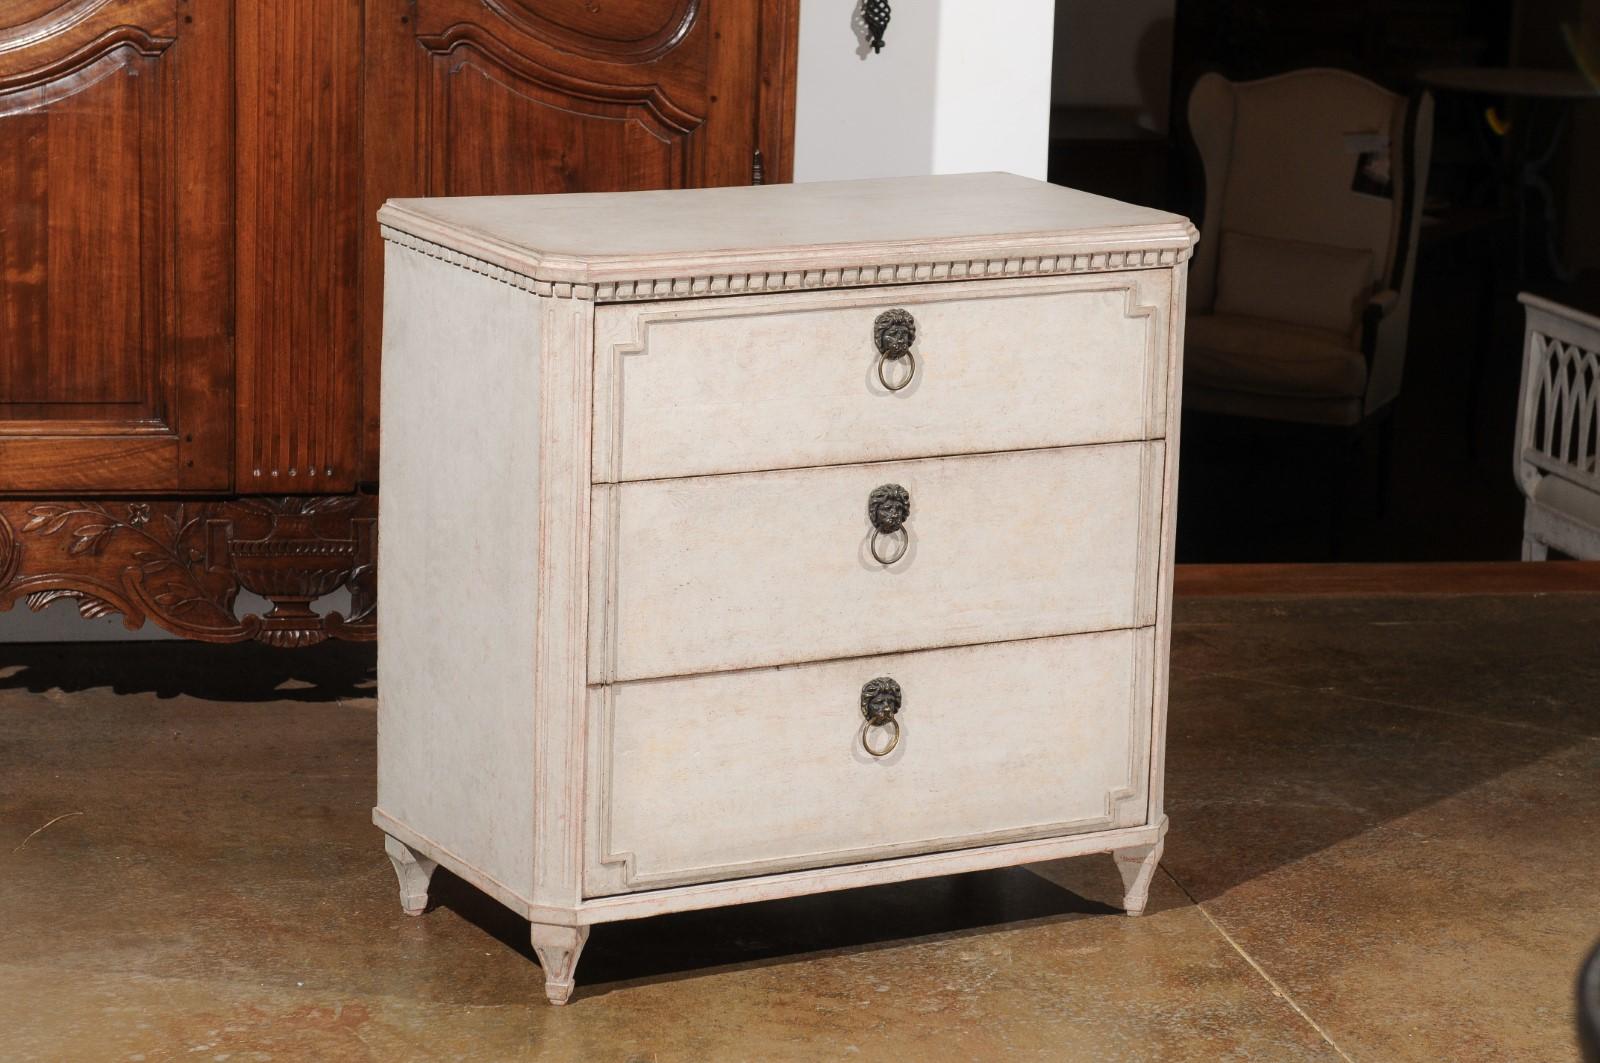 A Swedish Gustavian style painted wood three-drawer chest from the 19th century, with dentil molding and canted side posts. Born in Sweden during the 19th century, this Gustavian style painted chest features a rectangular top with canted corners in